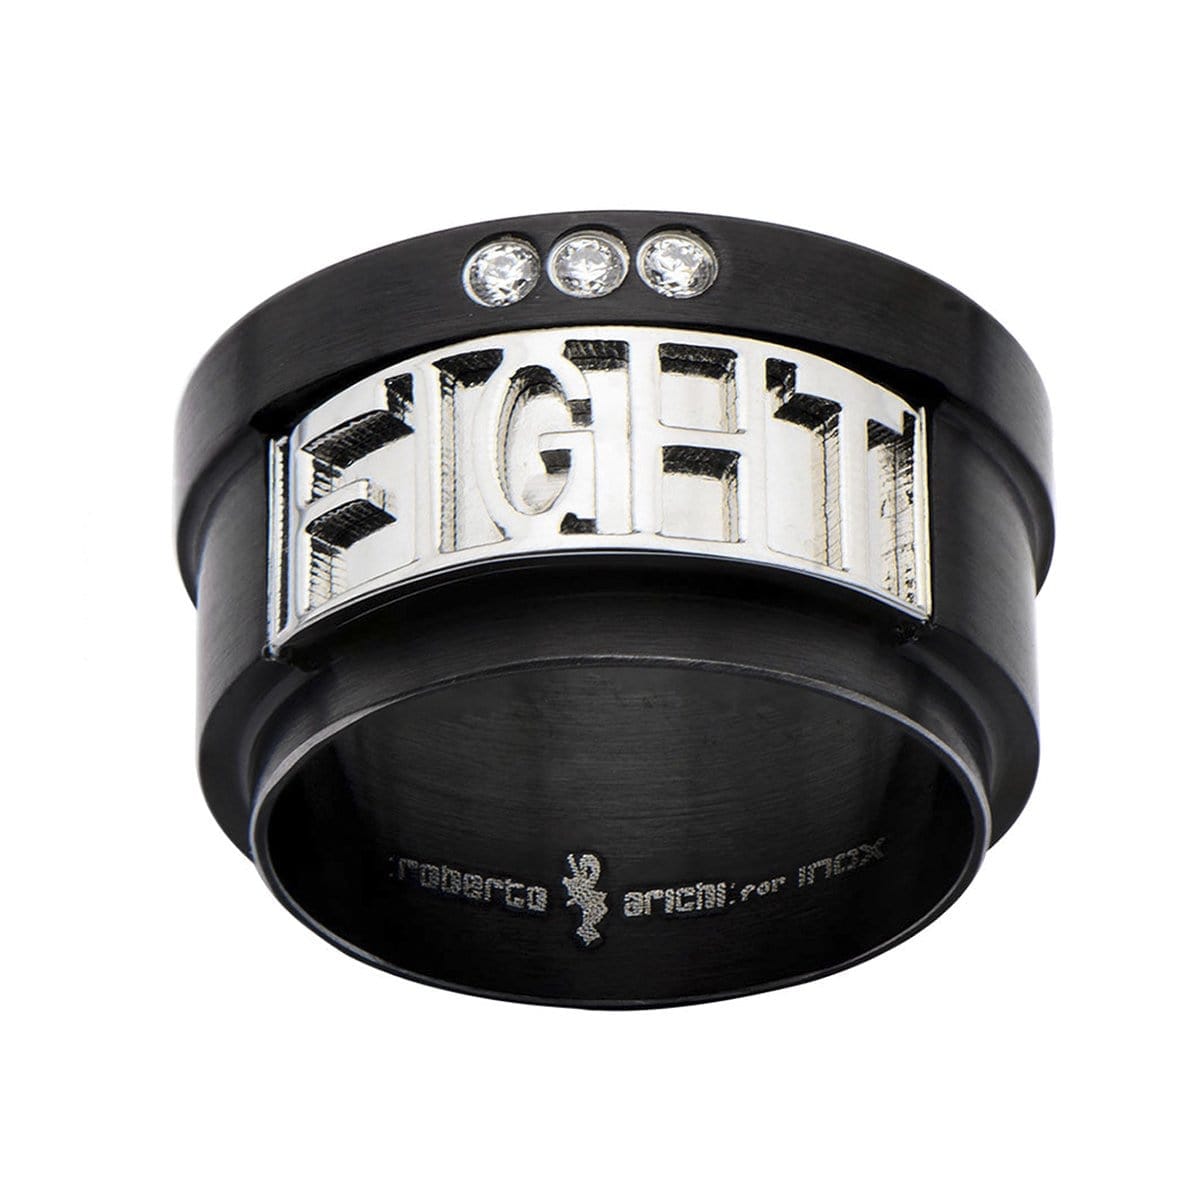 INOX JEWELRY Rings Black and Silver Tone Stainless Steel Roberto Arichi Black CZ FIGHT Ring